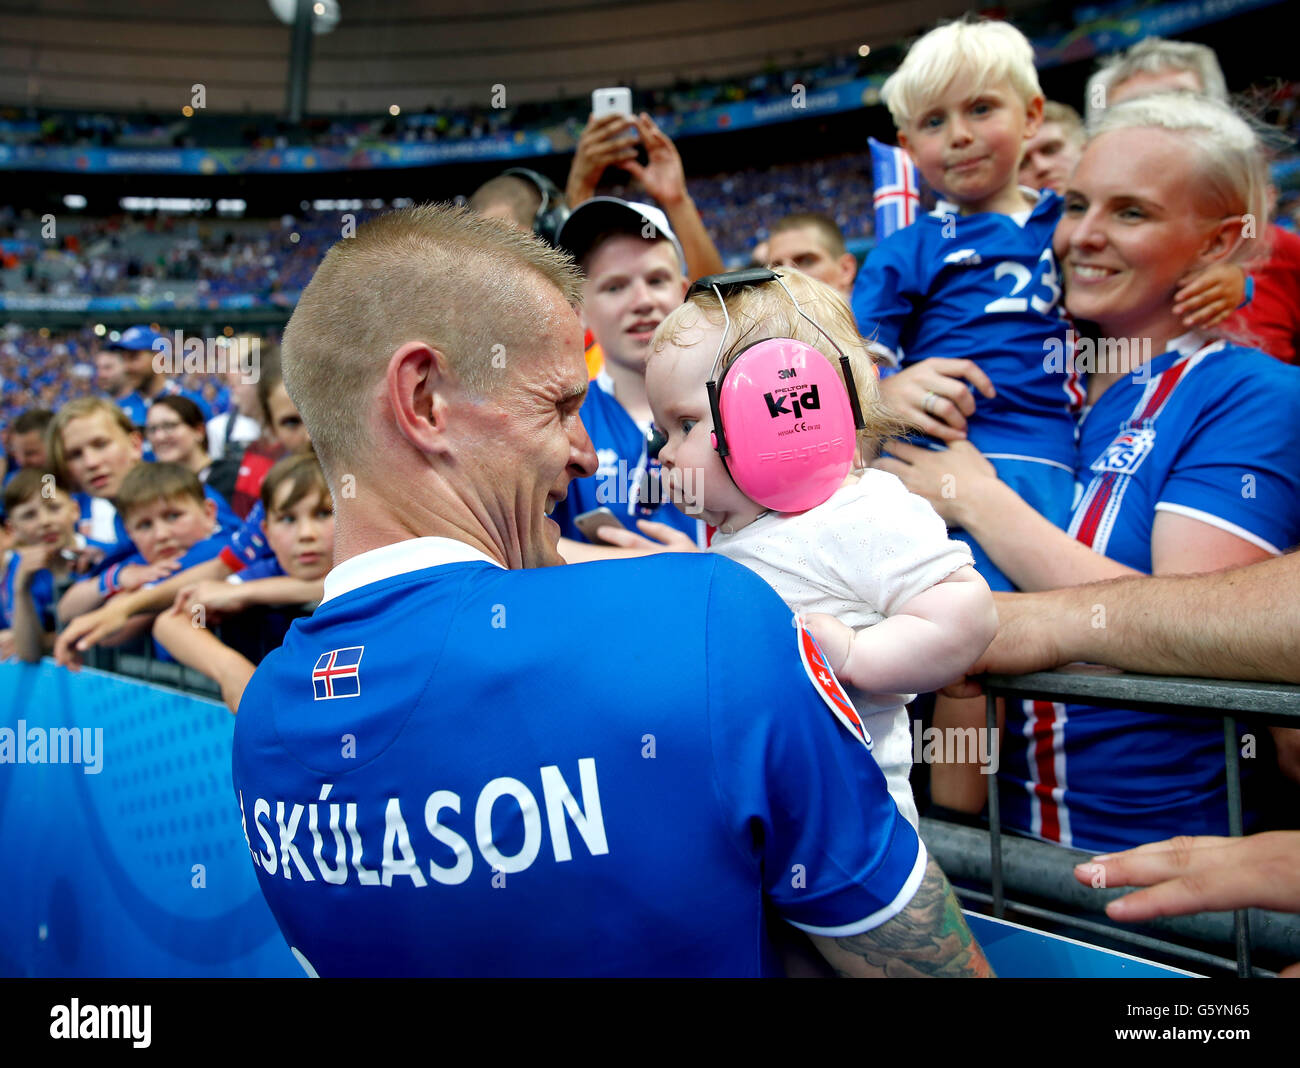 Iceland's Ari Freyr Skulason holds a baby from the crowd as he celebrates qualifying for the last 16 round after the Euro 2016, Group F match at the Stade de France, Paris. after qualifying for the last 16 round after the Euro 2016, Group F match at the Stade de France, Paris. Stock Photo